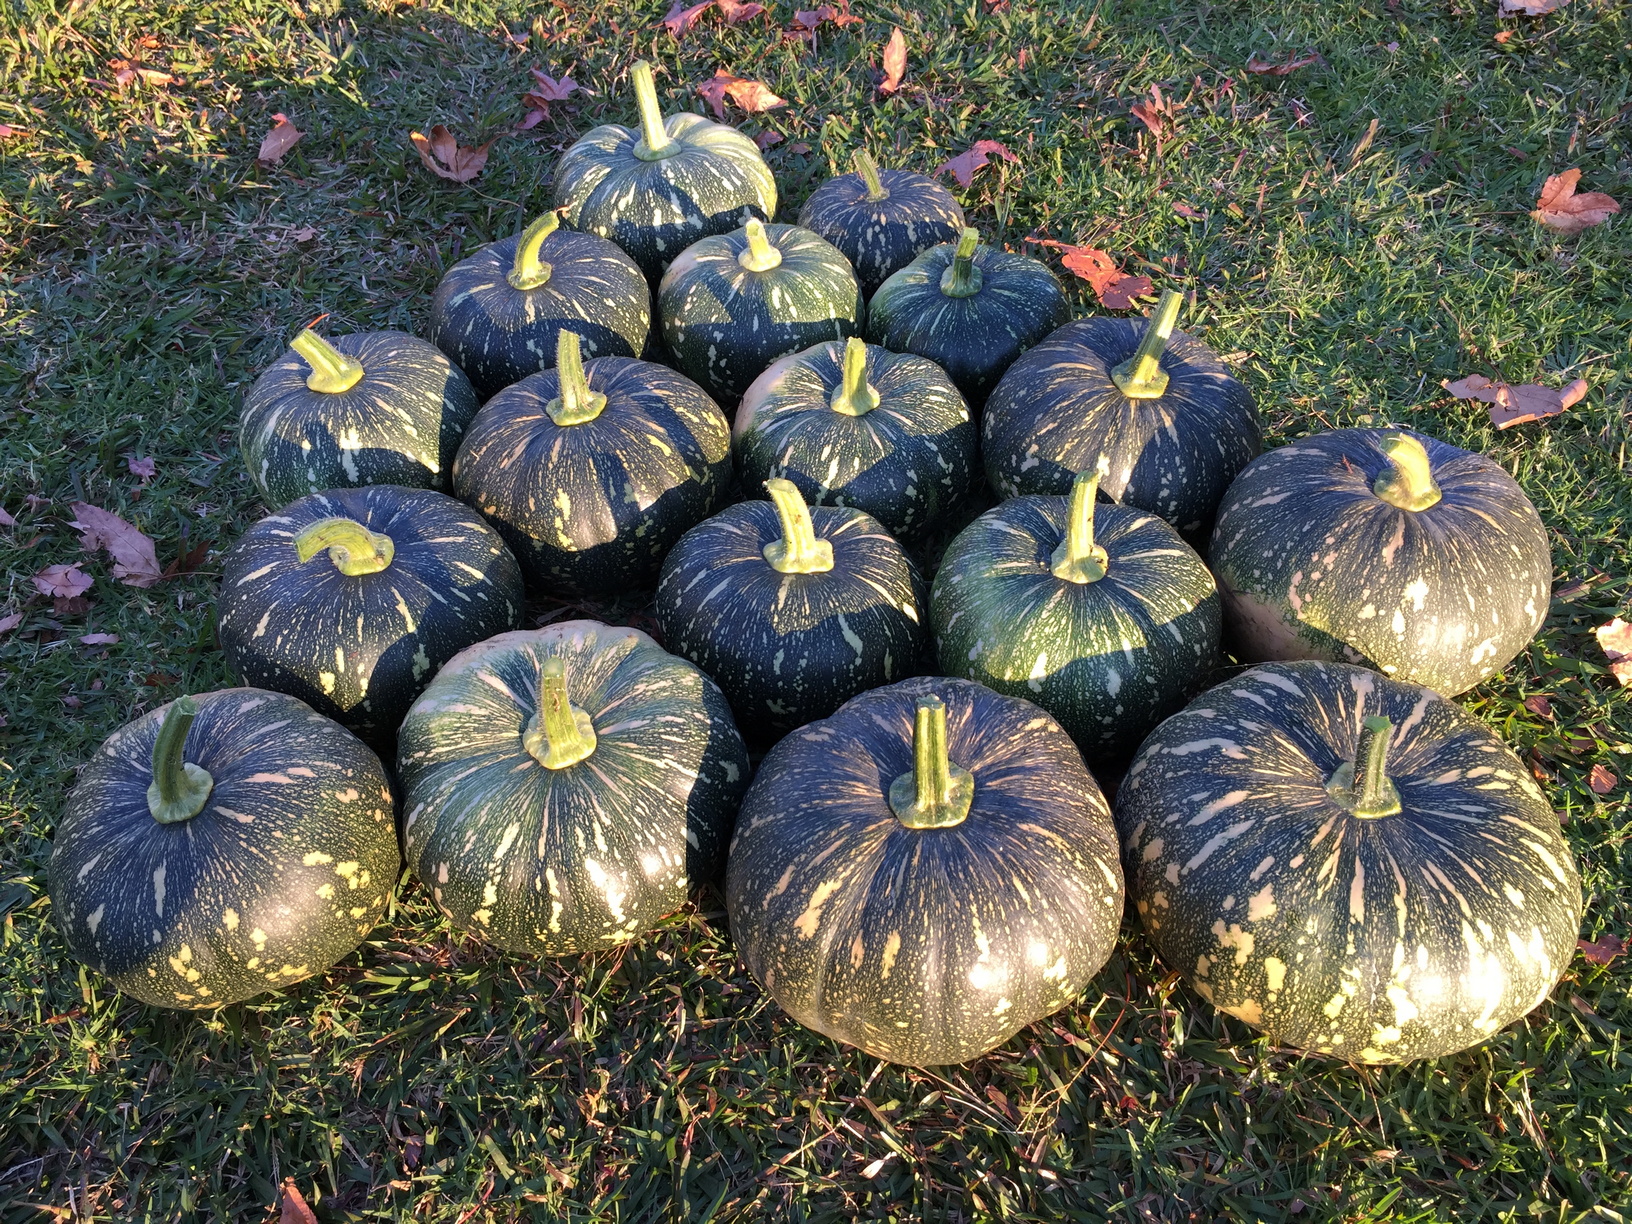 Lots of Kent pumpkins! These ones came up from seeds in the compost that was used in the veggie beds.